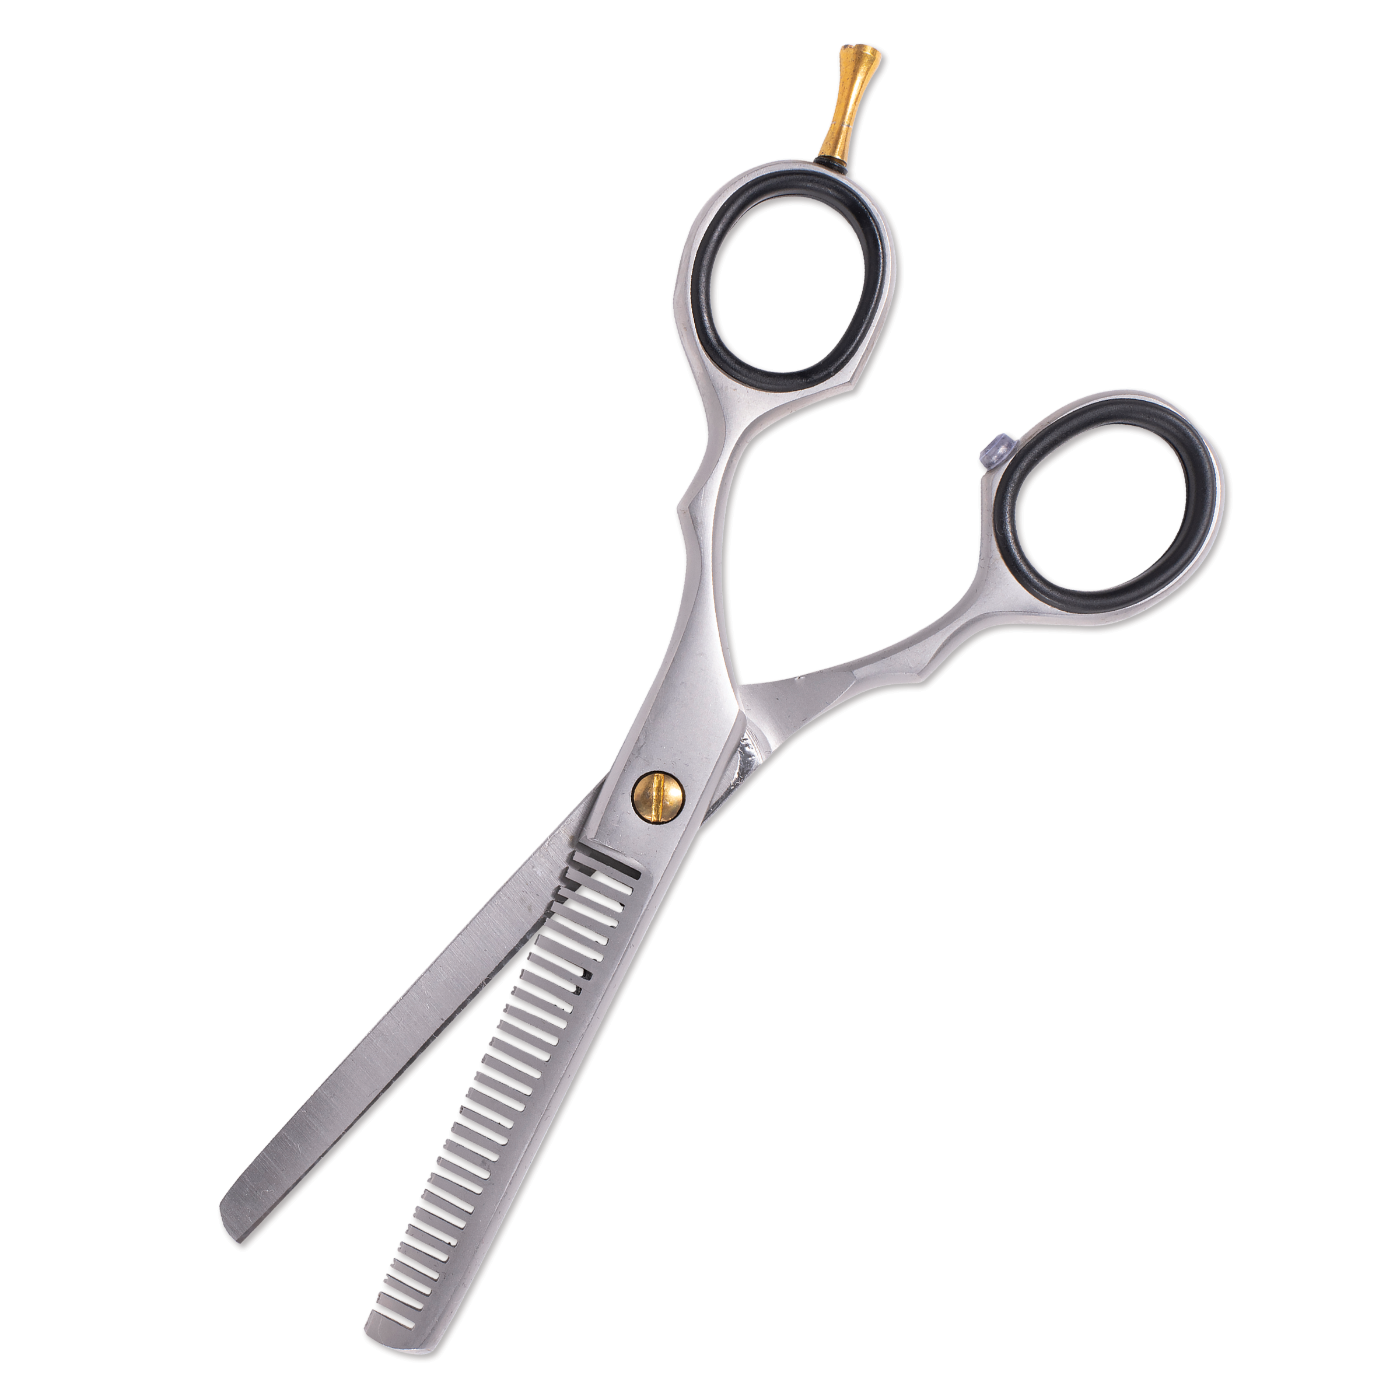 6" Premier Stainless Steel, 27-Tooth Thinning Shear